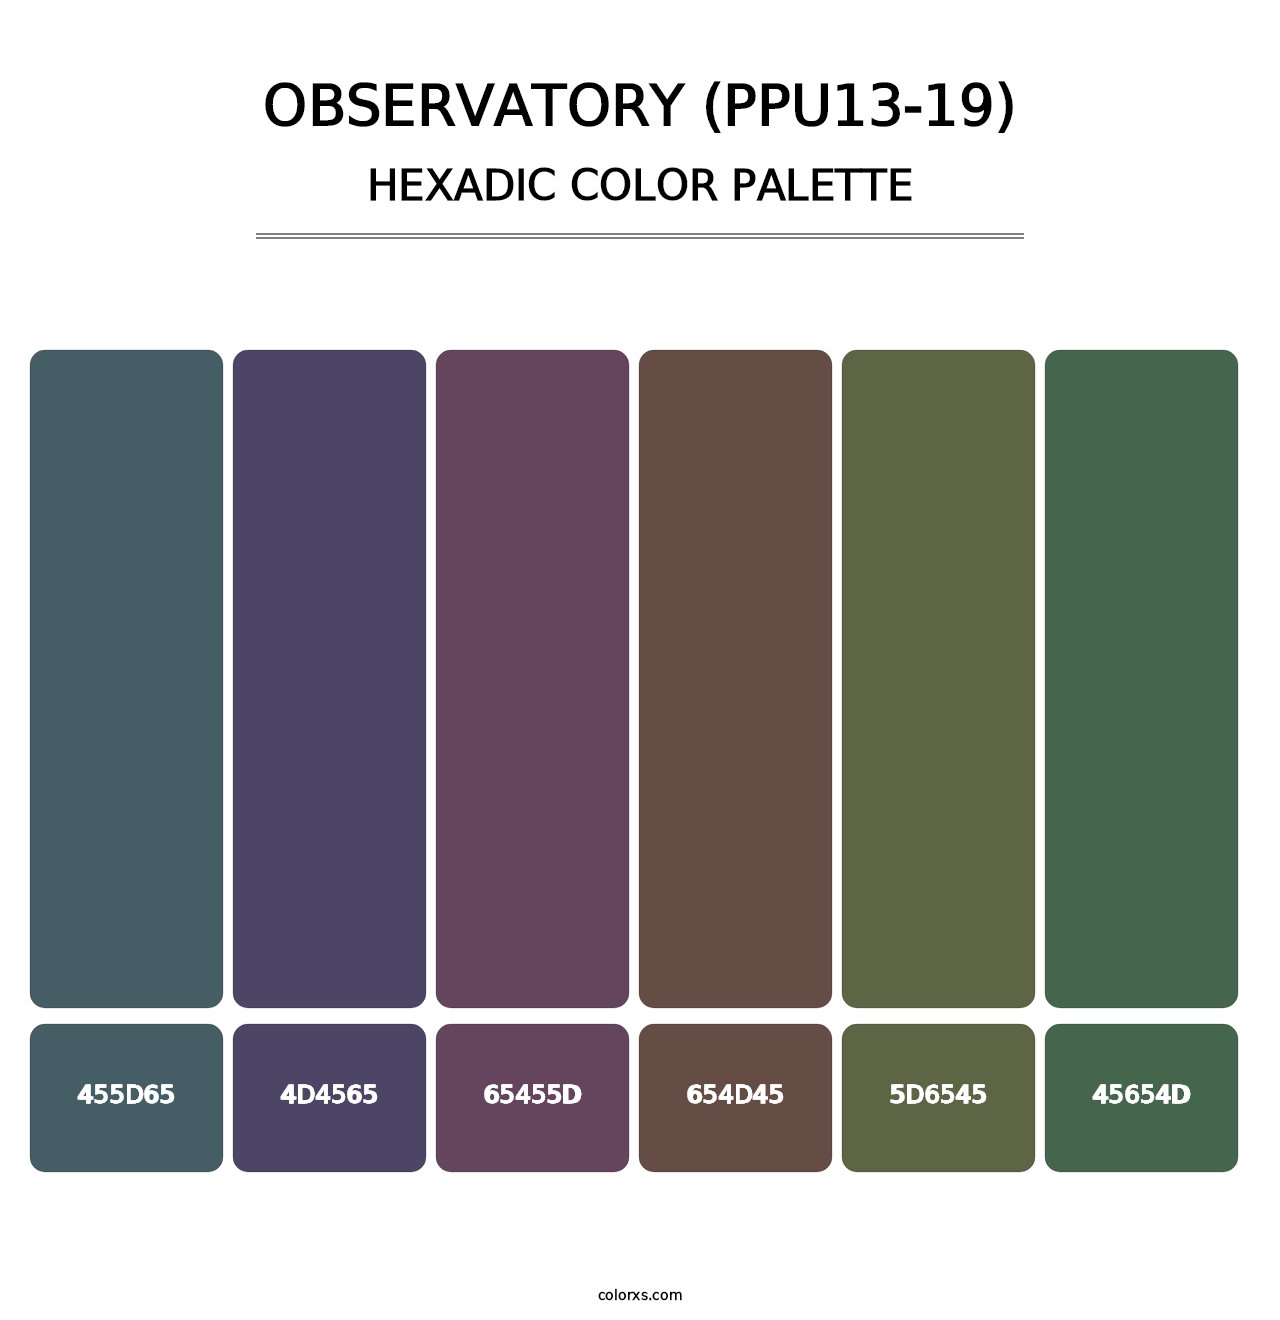 Observatory (PPU13-19) - Hexadic Color Palette